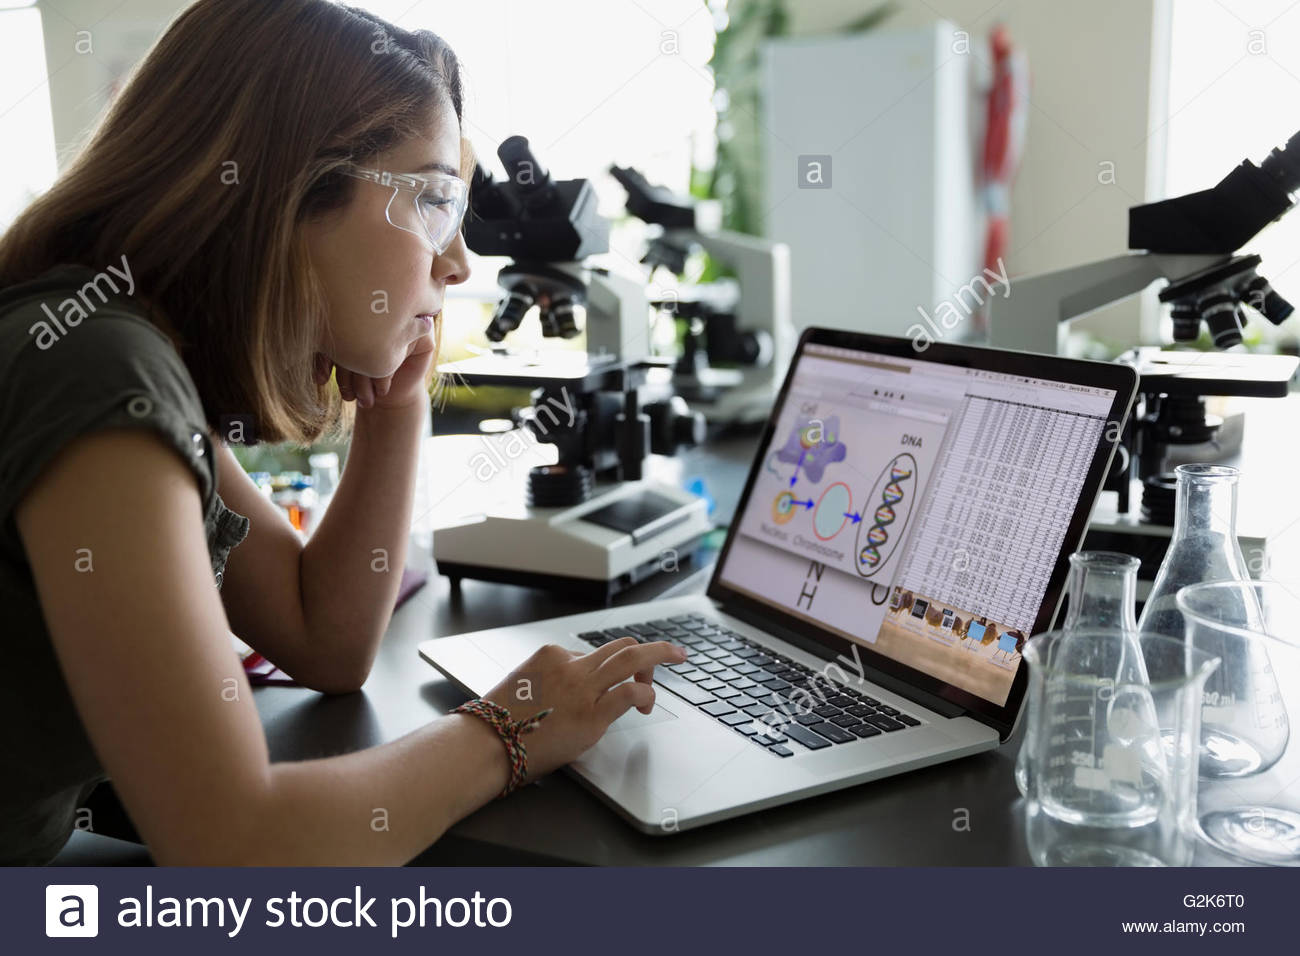 College student using laptop in science laboratory Stock Photo